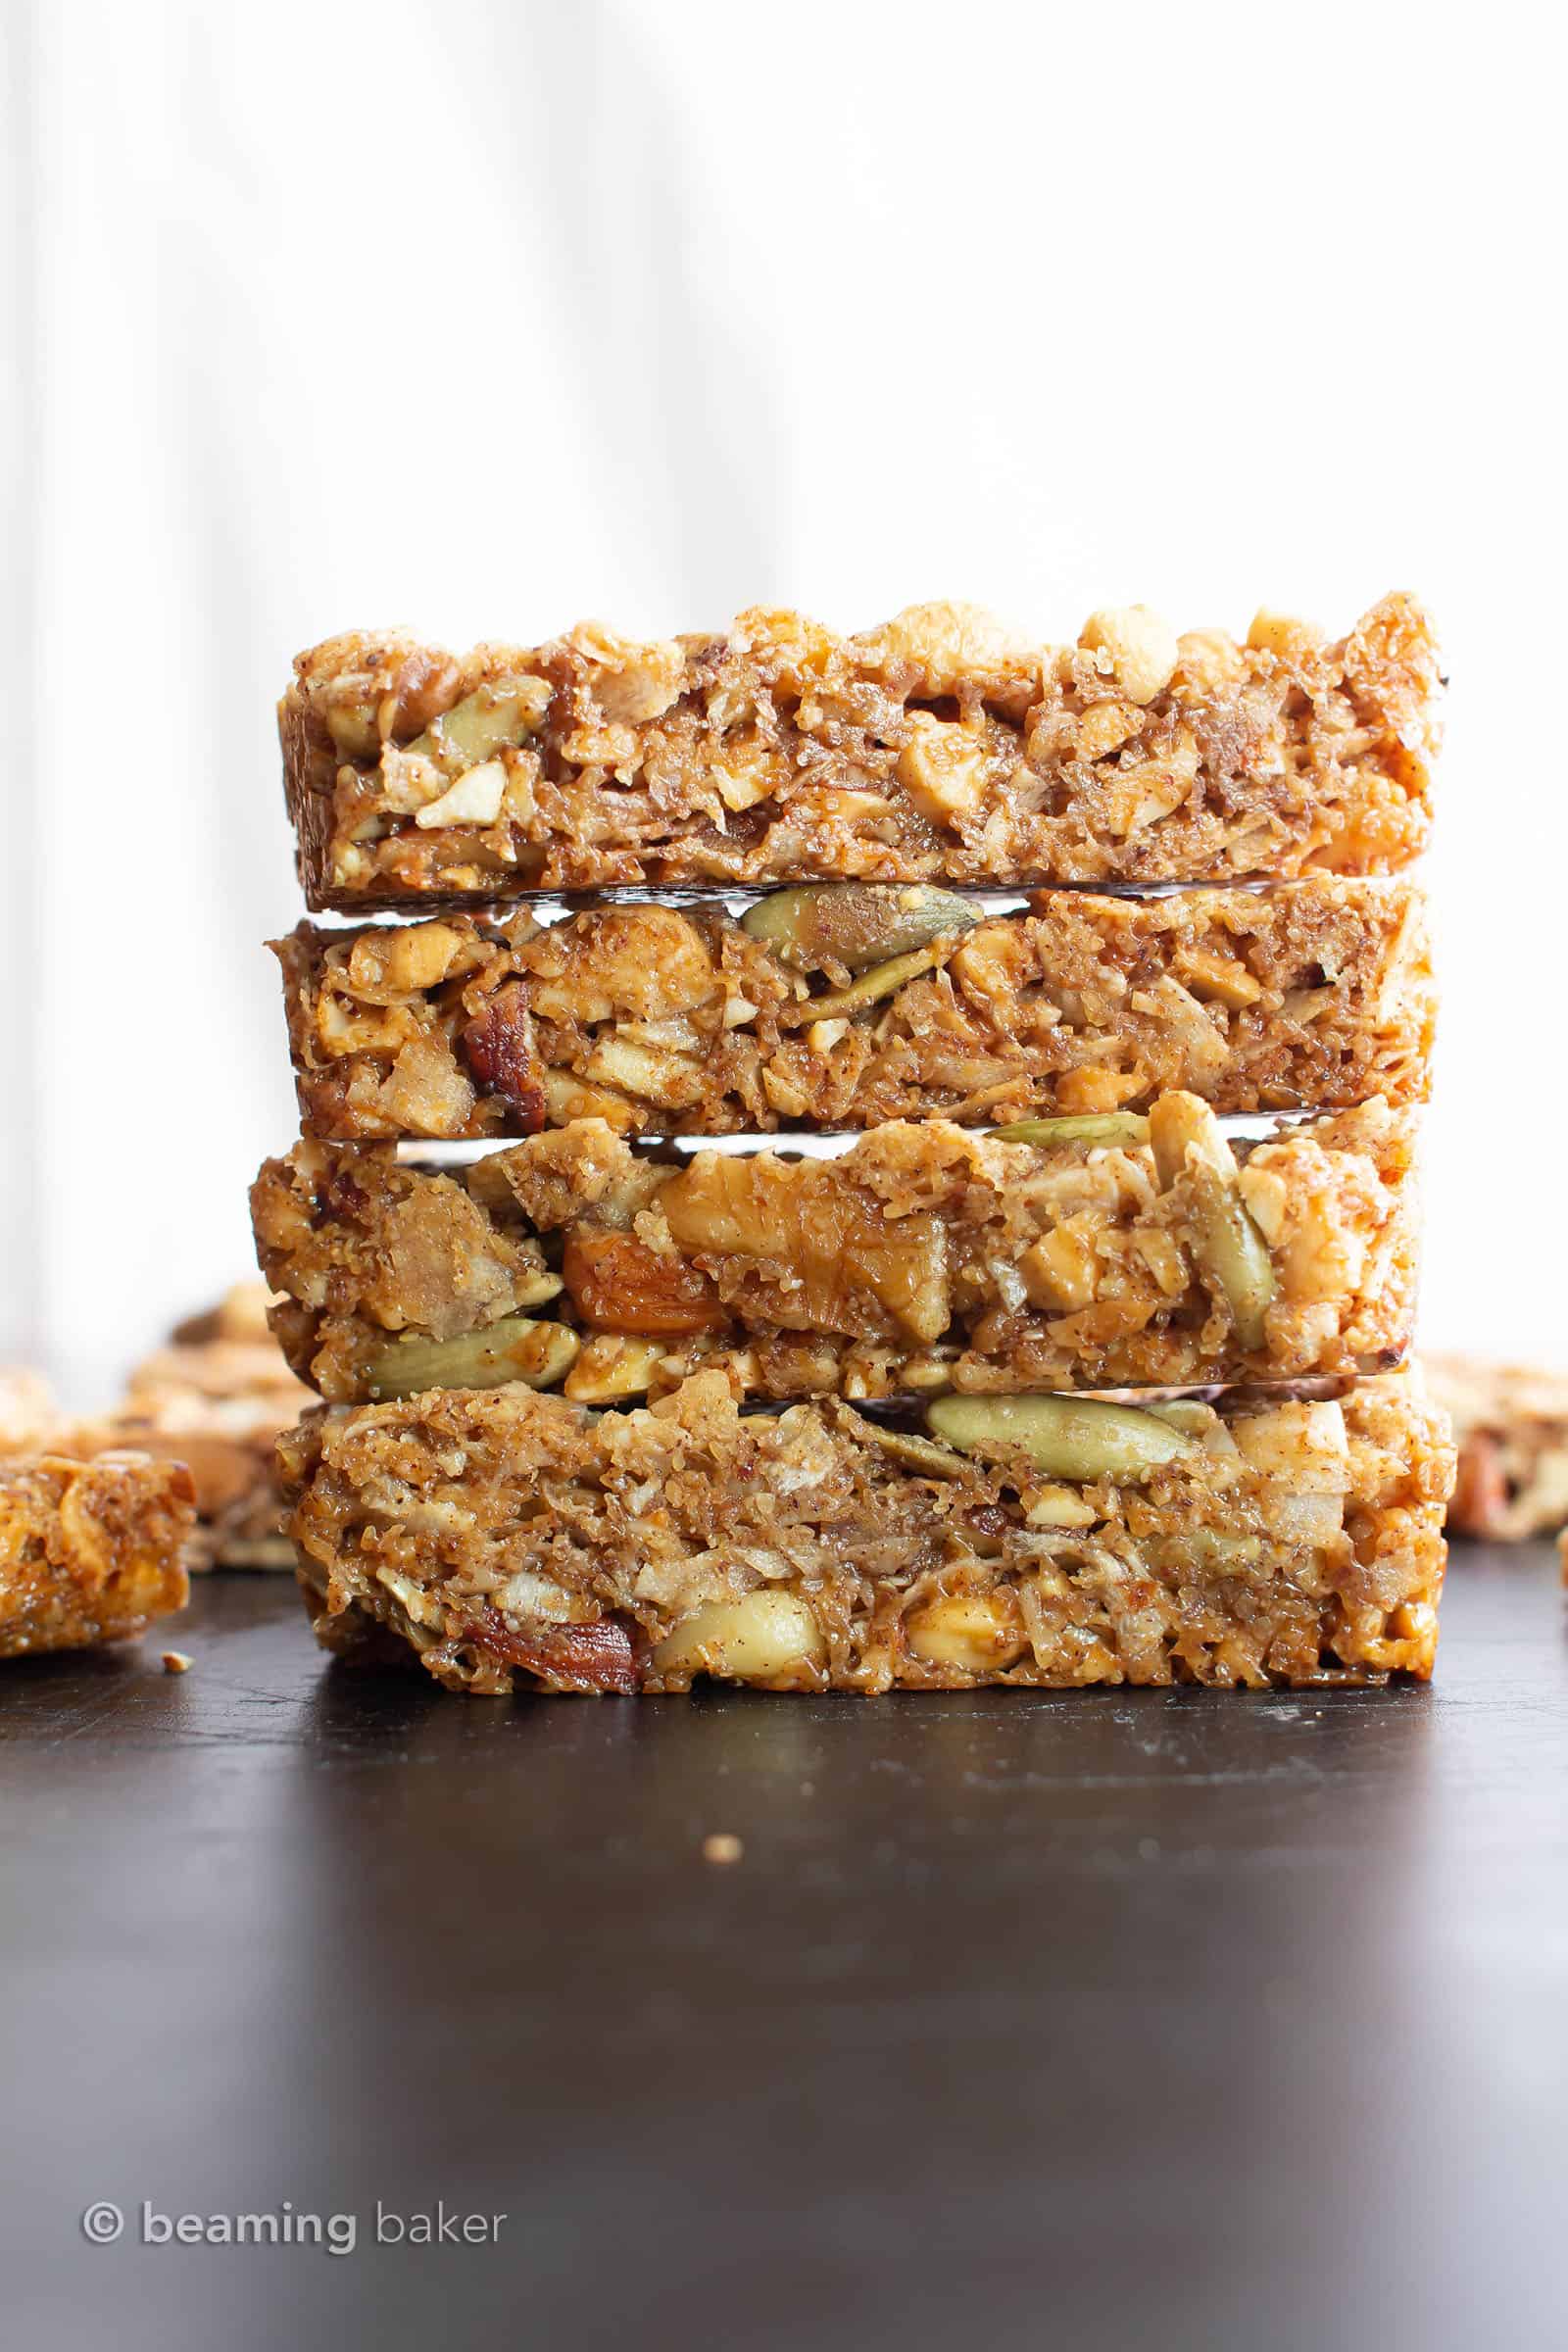 Homemade Paleo Granola Bars (V, GF): the BEST grain free granola bars recipe—chewy & satisfying, packed with nutty crunch and simple, whole ingredients. Gluten Free, Vegan, Paleo, Protein-Rich, Dairy-Free. #Paleo #GrainFree #GranolaBars #Healthy #Snacks | Recipe at BeamingBaker.com